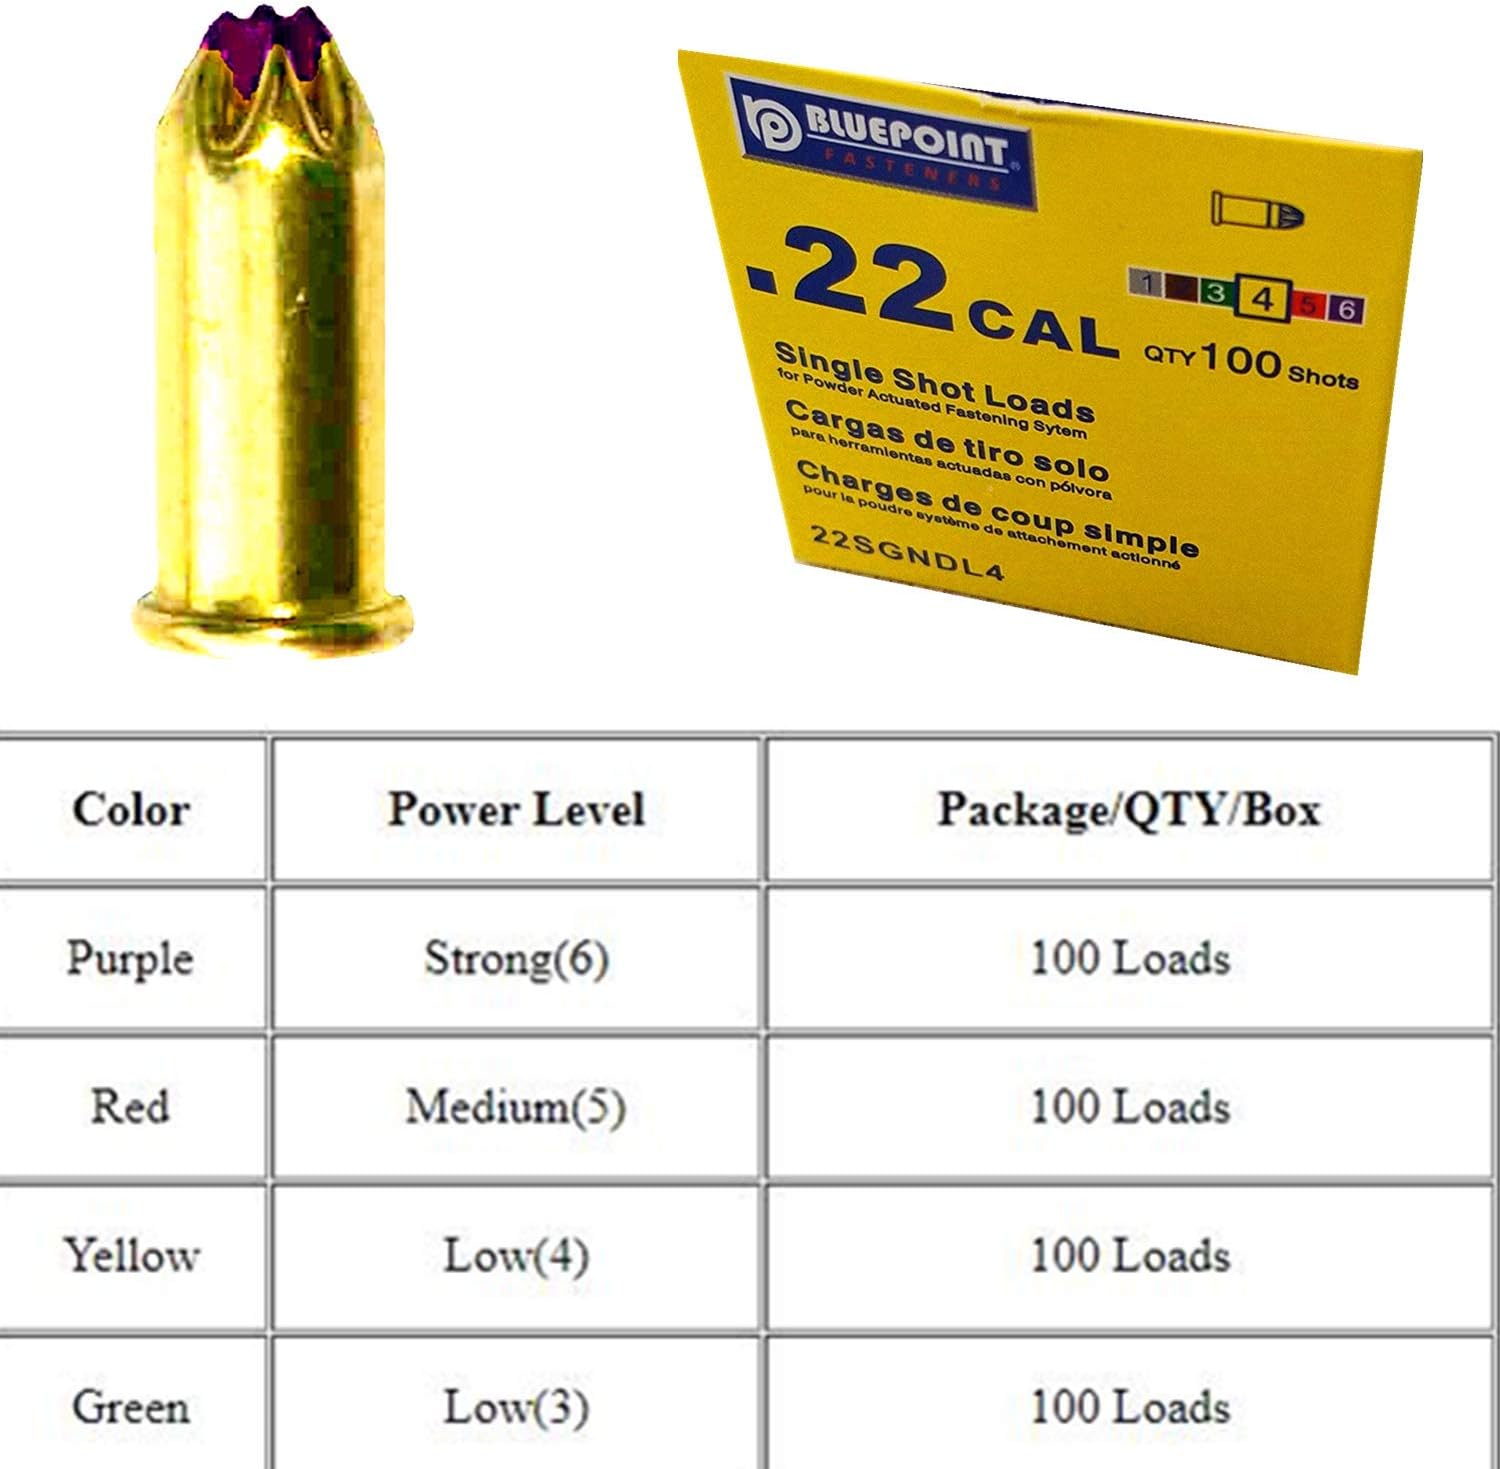 Blue Point 0.22 Caliber Purple Single Shot Powder Loads, High Velocity Strong Power Fasteners Power Loads (100-Count) (Level 6)